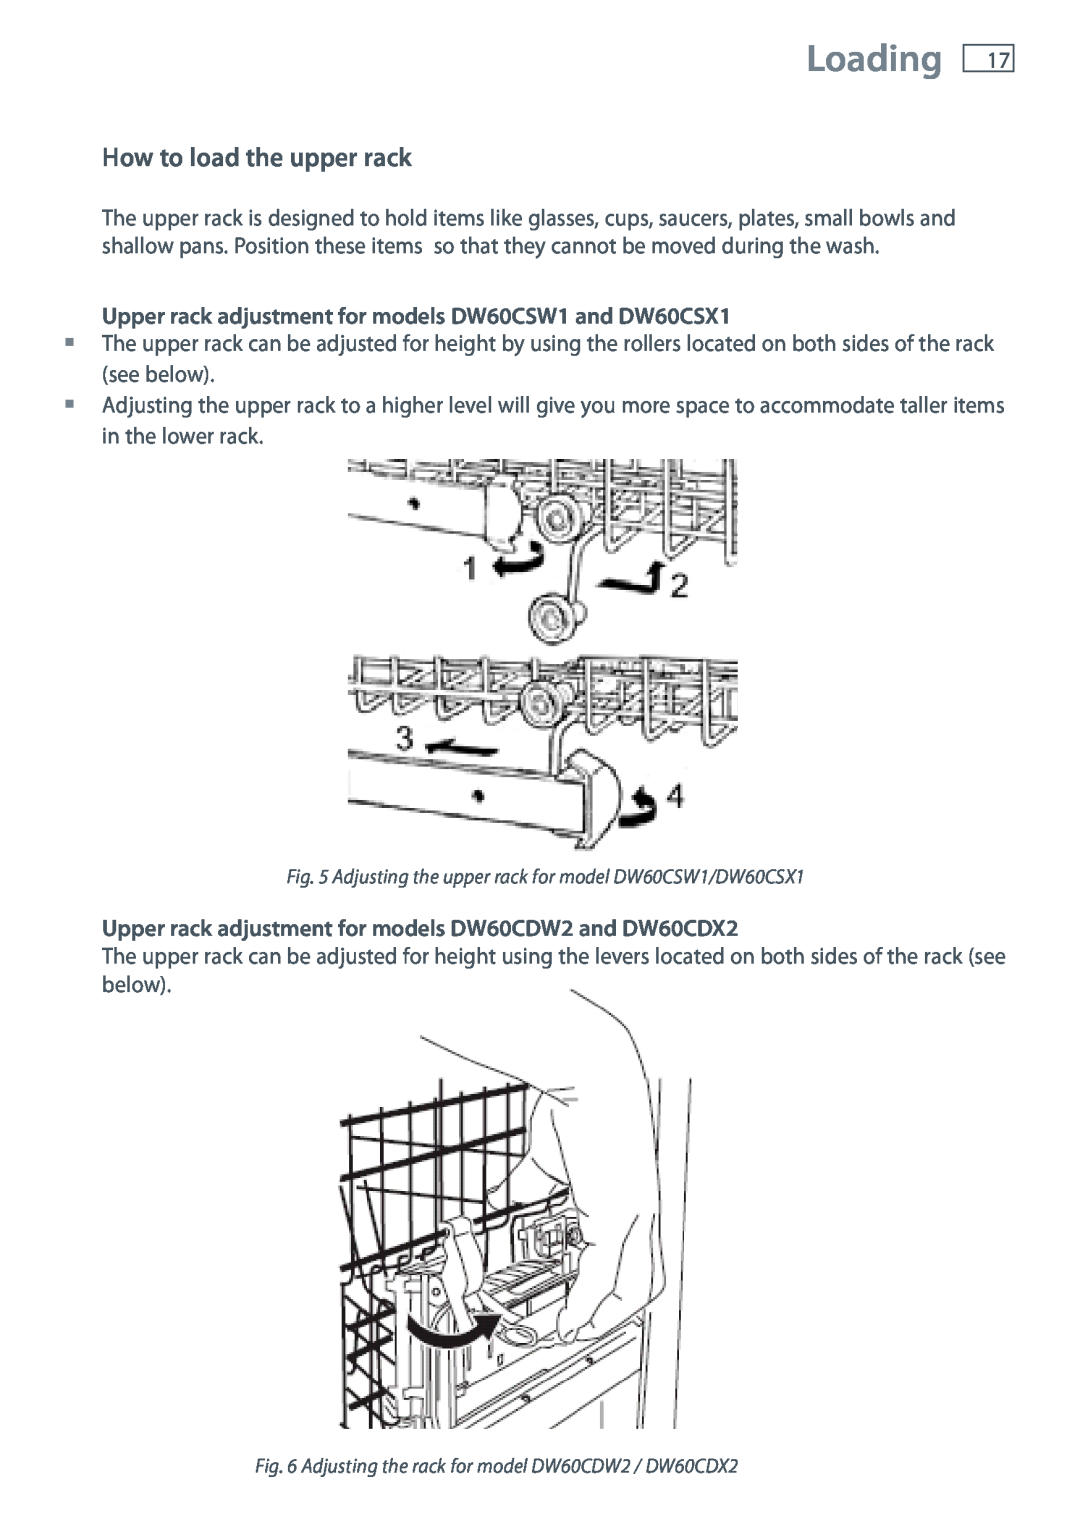 Fisher & Paykel Loading, How to load the upper rack, Upper rack adjustment for models DW60CSW1 and DW60CSX1 